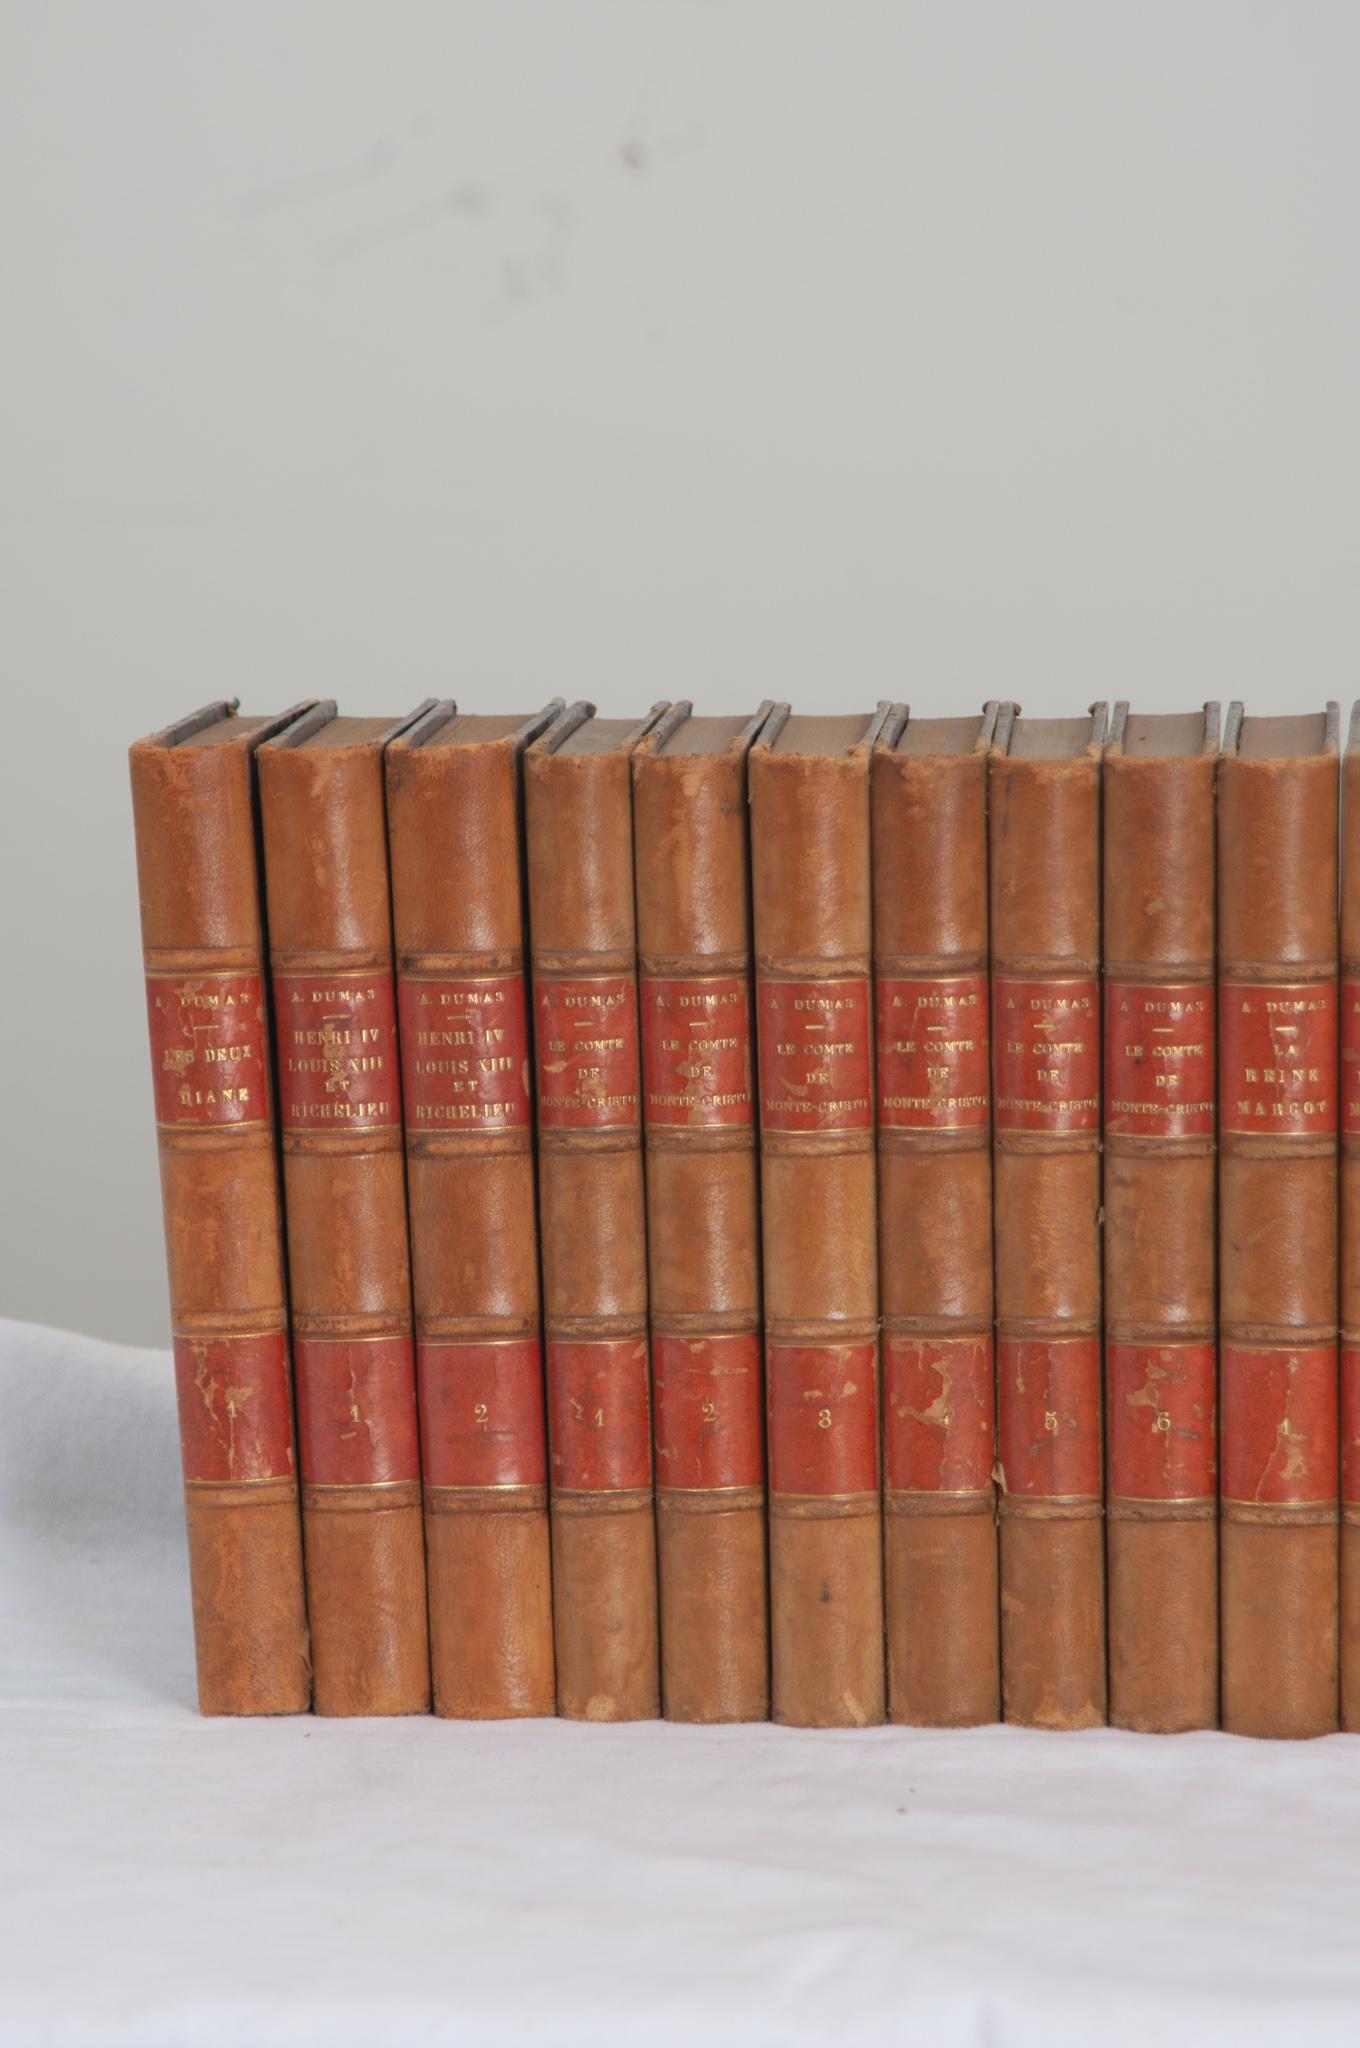 Other Set of 25 Books by French Author Alexandre Dumas